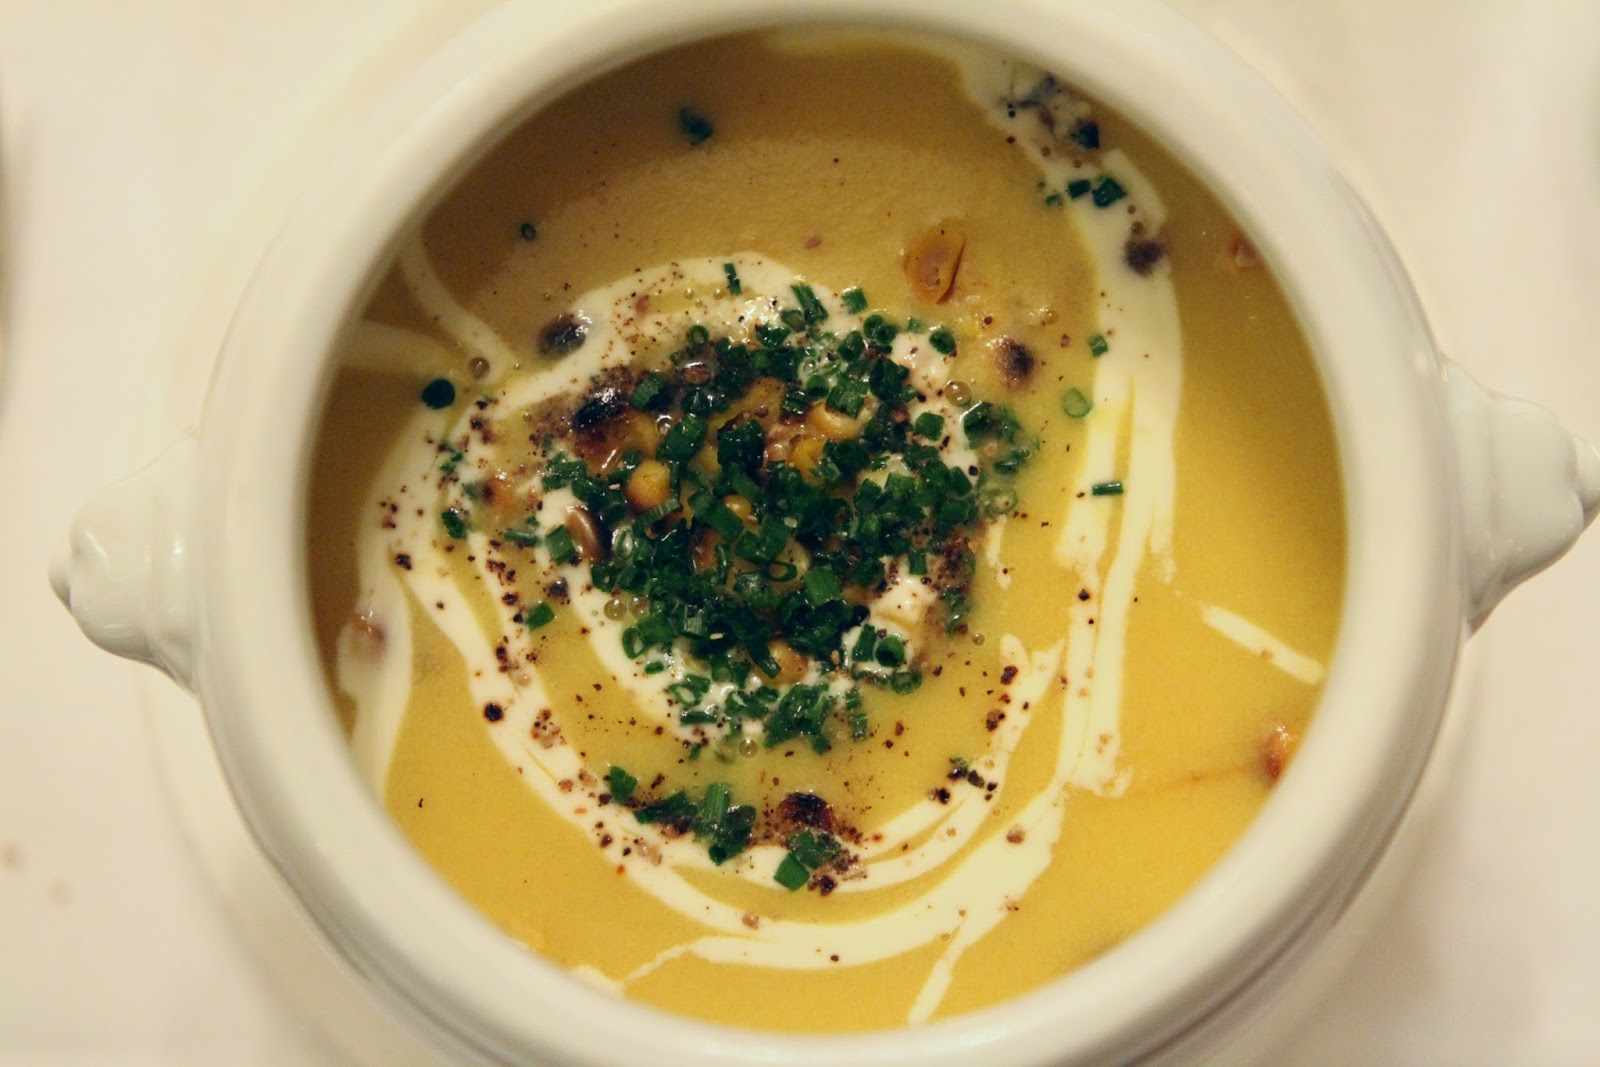 The Savoy grill spiced sweetcorn soup